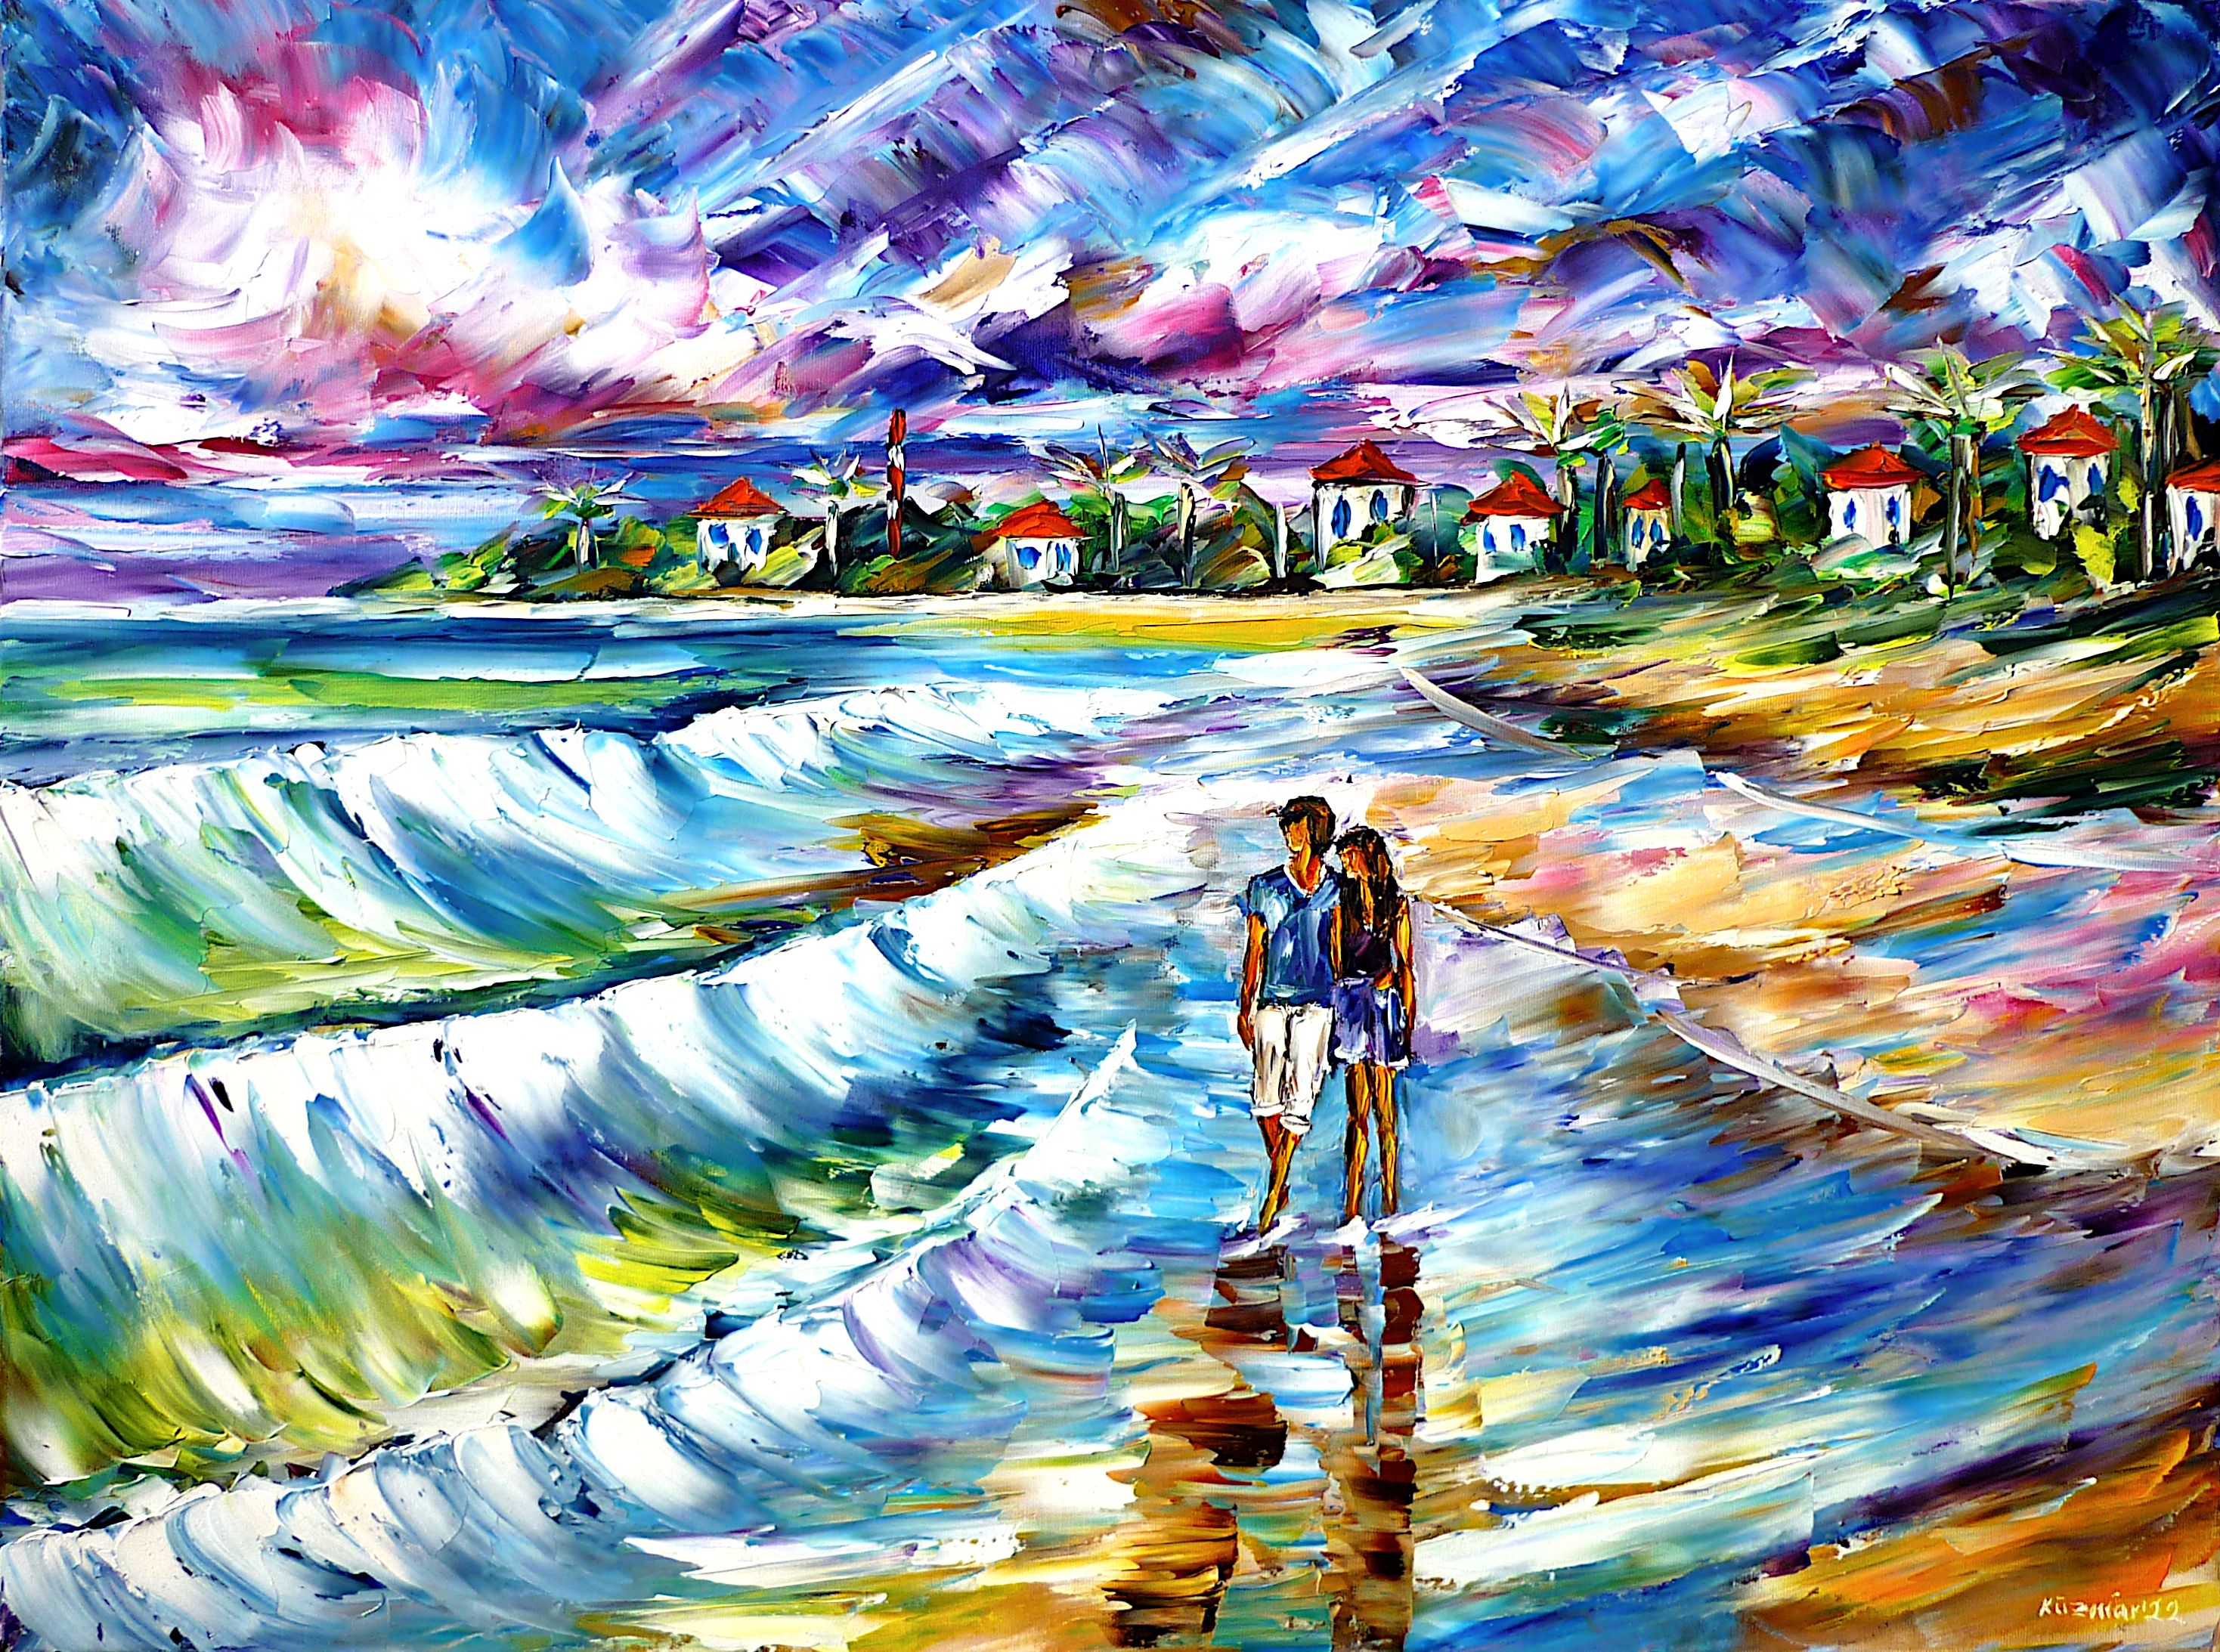 beach walk,south pacific,South Seas beach,South Seas landscape,South Seas picture,South Seas painting,South Seas vacation,South Seas islands,Tahiti,Samoa,Fiji Islands,Hawaii,South Seas paradise,South Seas romance,palm trees,South Seas village,South Seas houses,People on the beach,couple in love on the beach,walking on the beach,beach scene,people in love,couple in love,by the sea,beach waves,seascape,people by the sea,sky over the sea,abstract sky,menacing sky,people by the water,romantic scene,romantic picture,romantic painting,beach painting,sea painting,love,romance,wave lapping,wave foam,blue tones,blue colors,blue picture,palette knife oil painting,modern art,impressionism,expressionism,abstract painting,lively colors,colorful painting,bright colors,light reflections,impasto painting,figurative